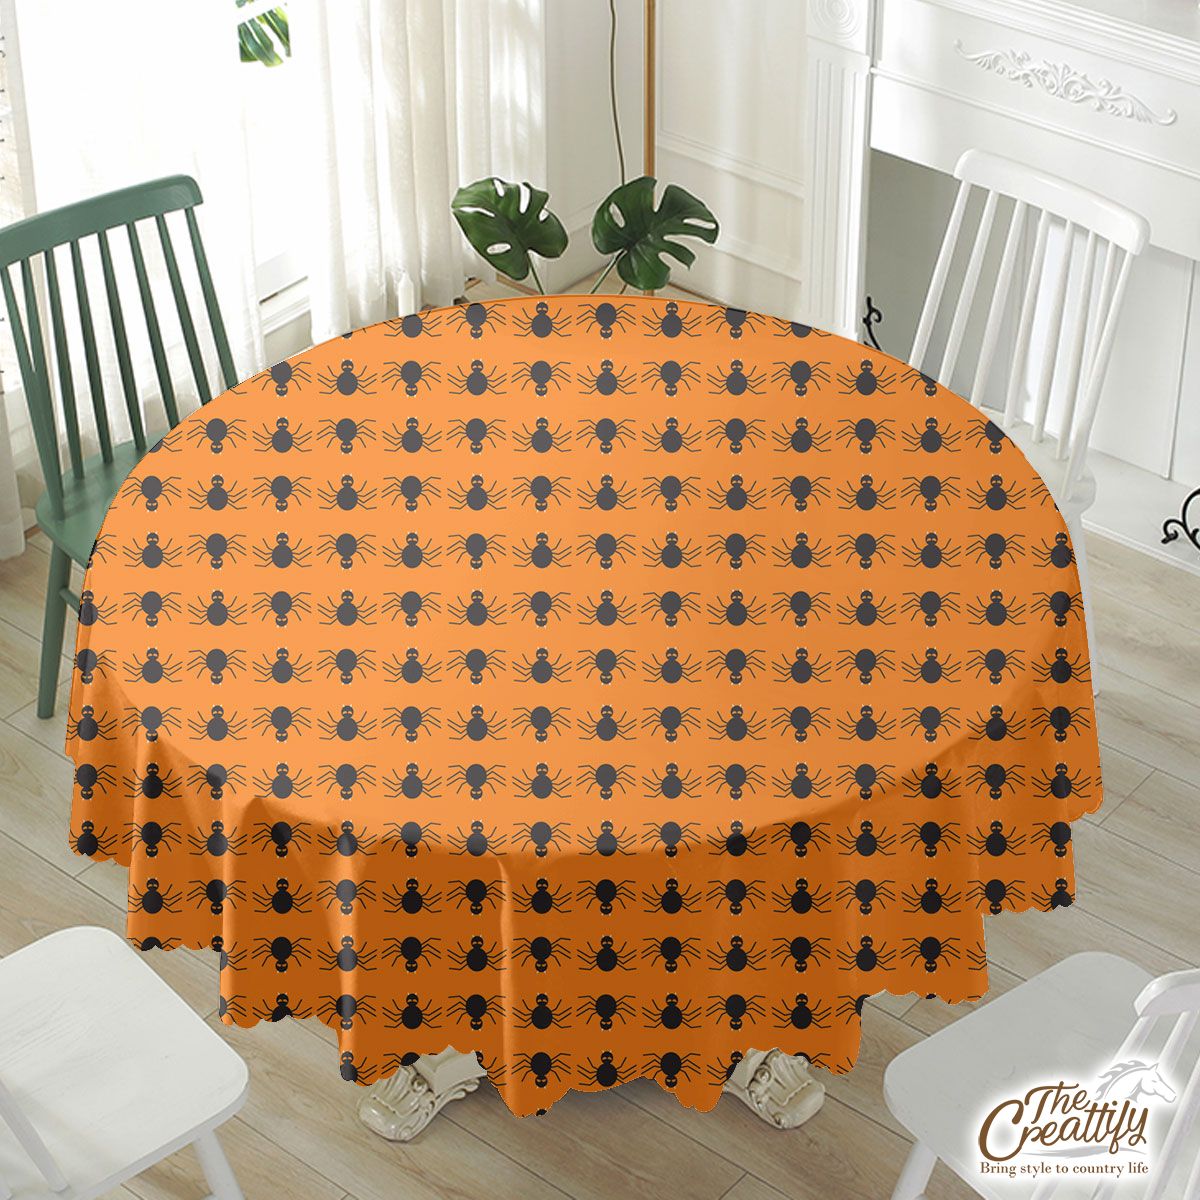 Black Spider On Halloween Background Waterproof Tablecloth